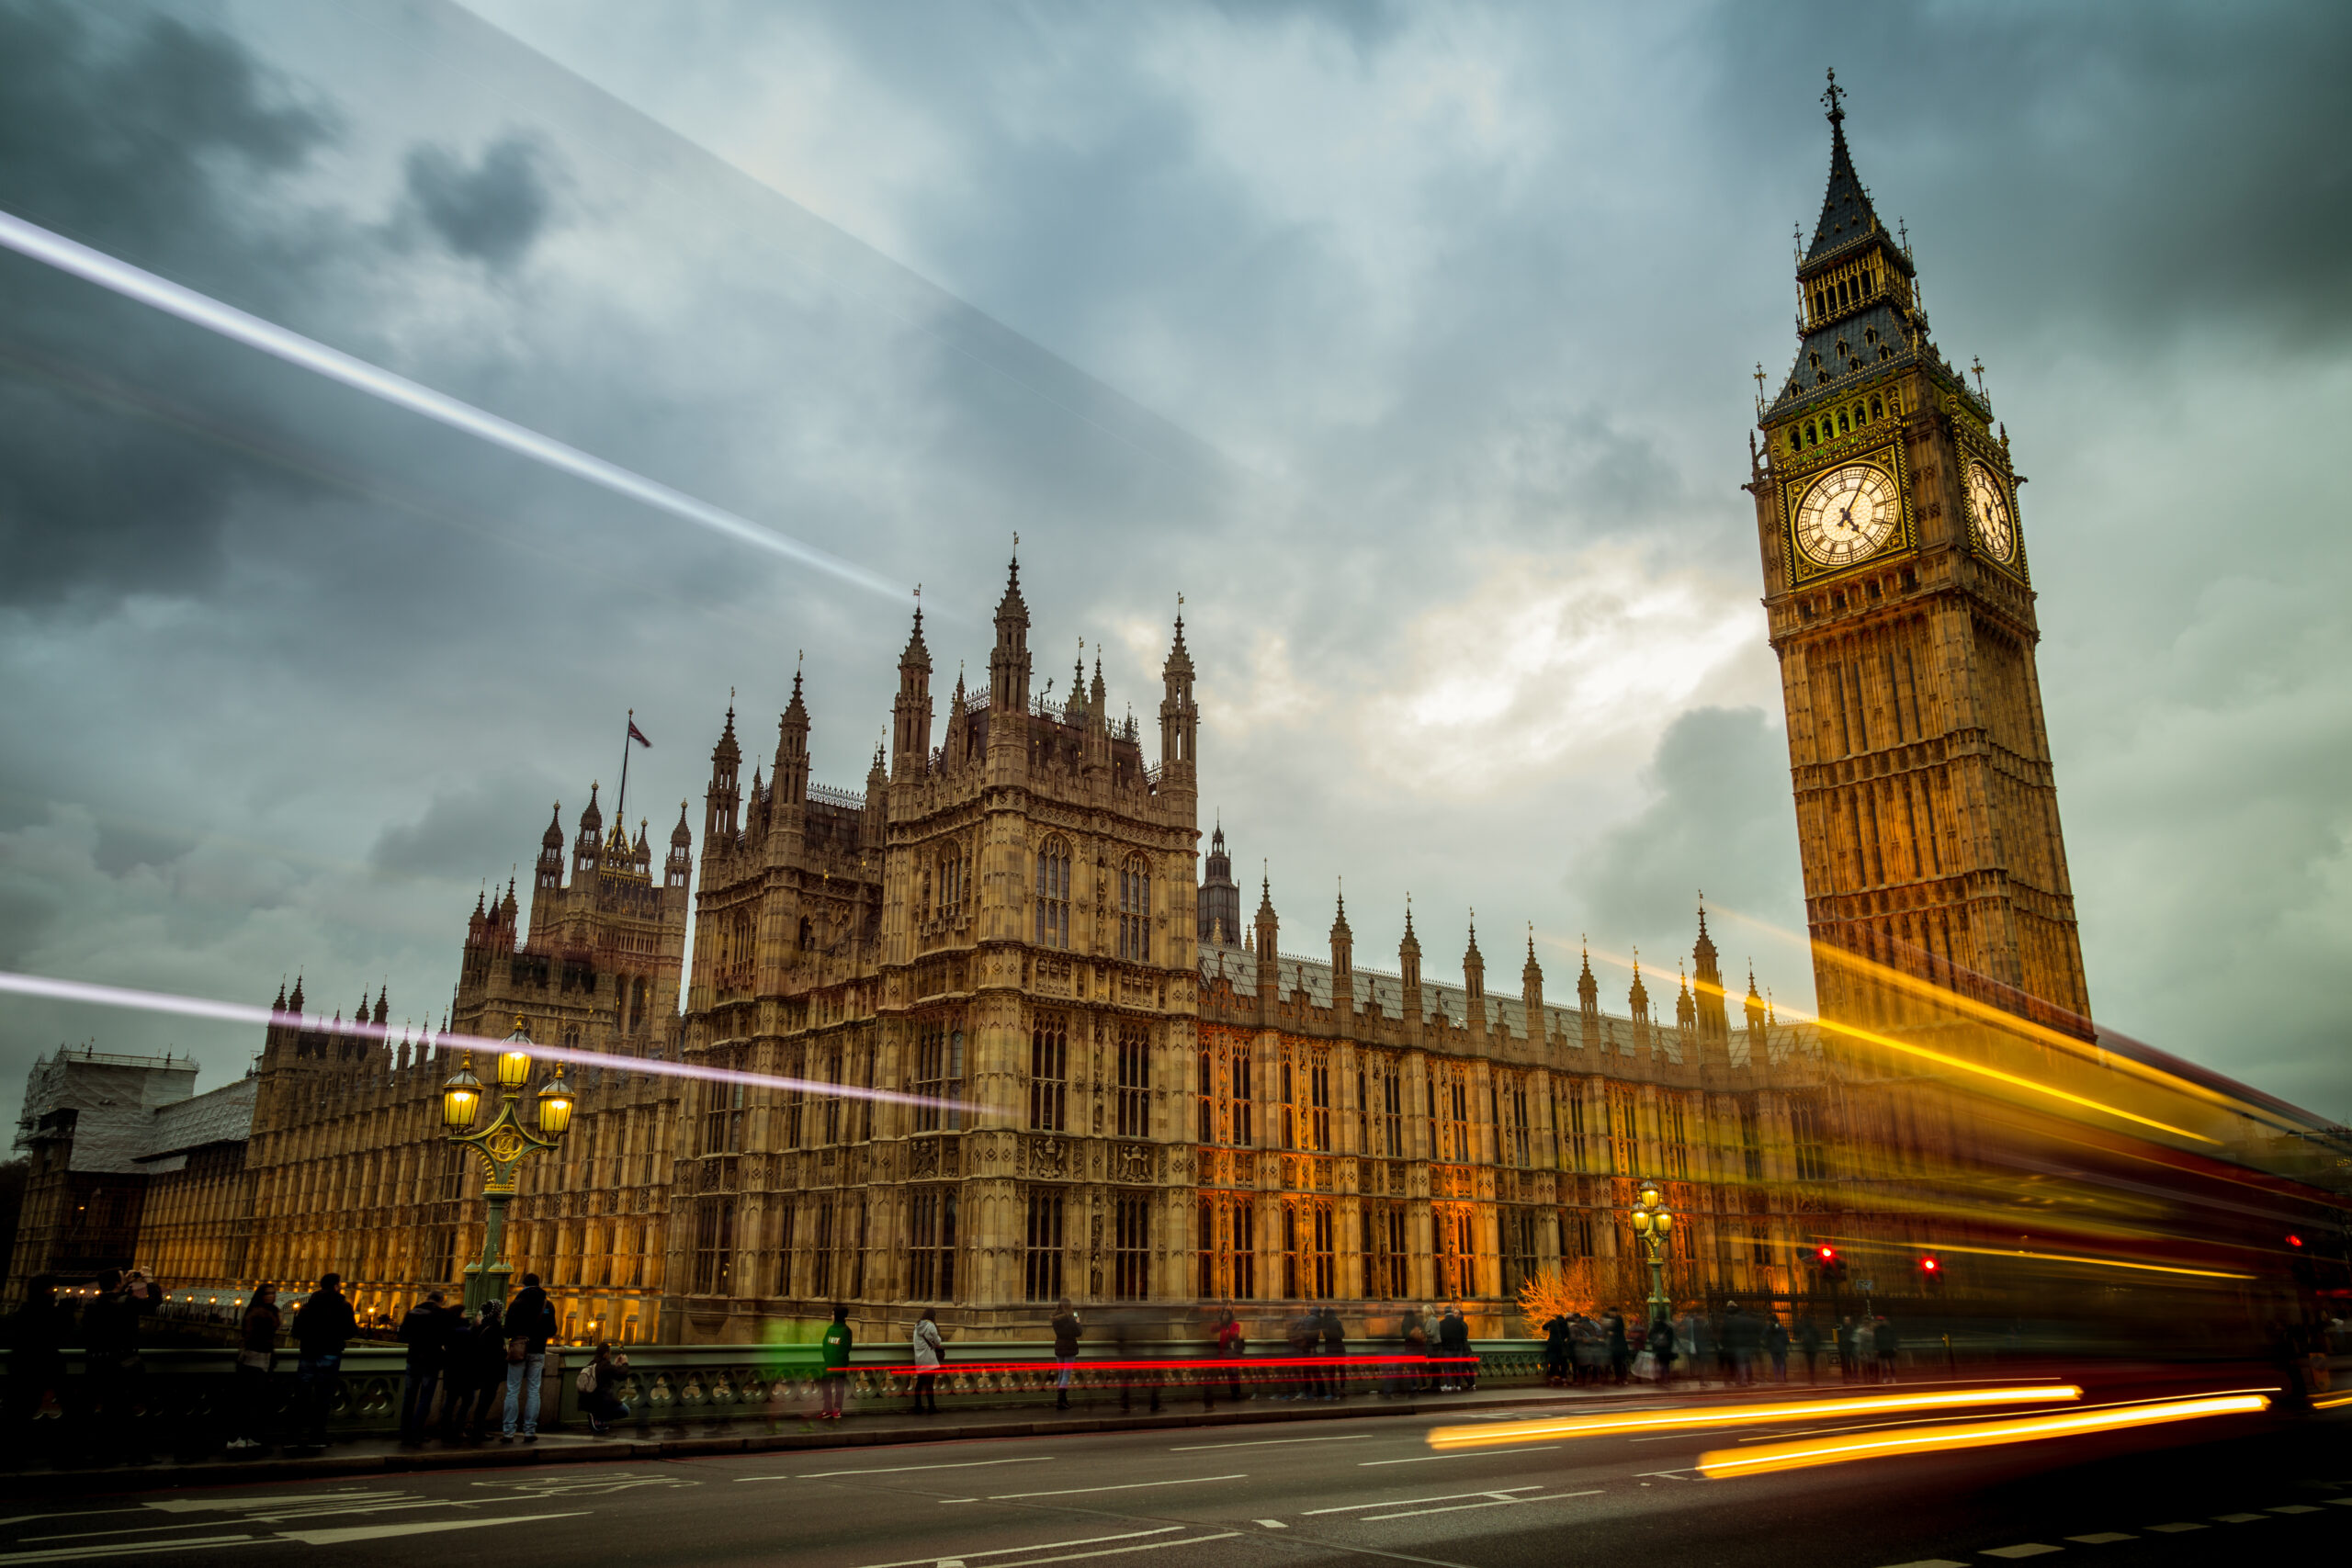 The image depicts Big Ben and the Houses of Parliament in London, England.